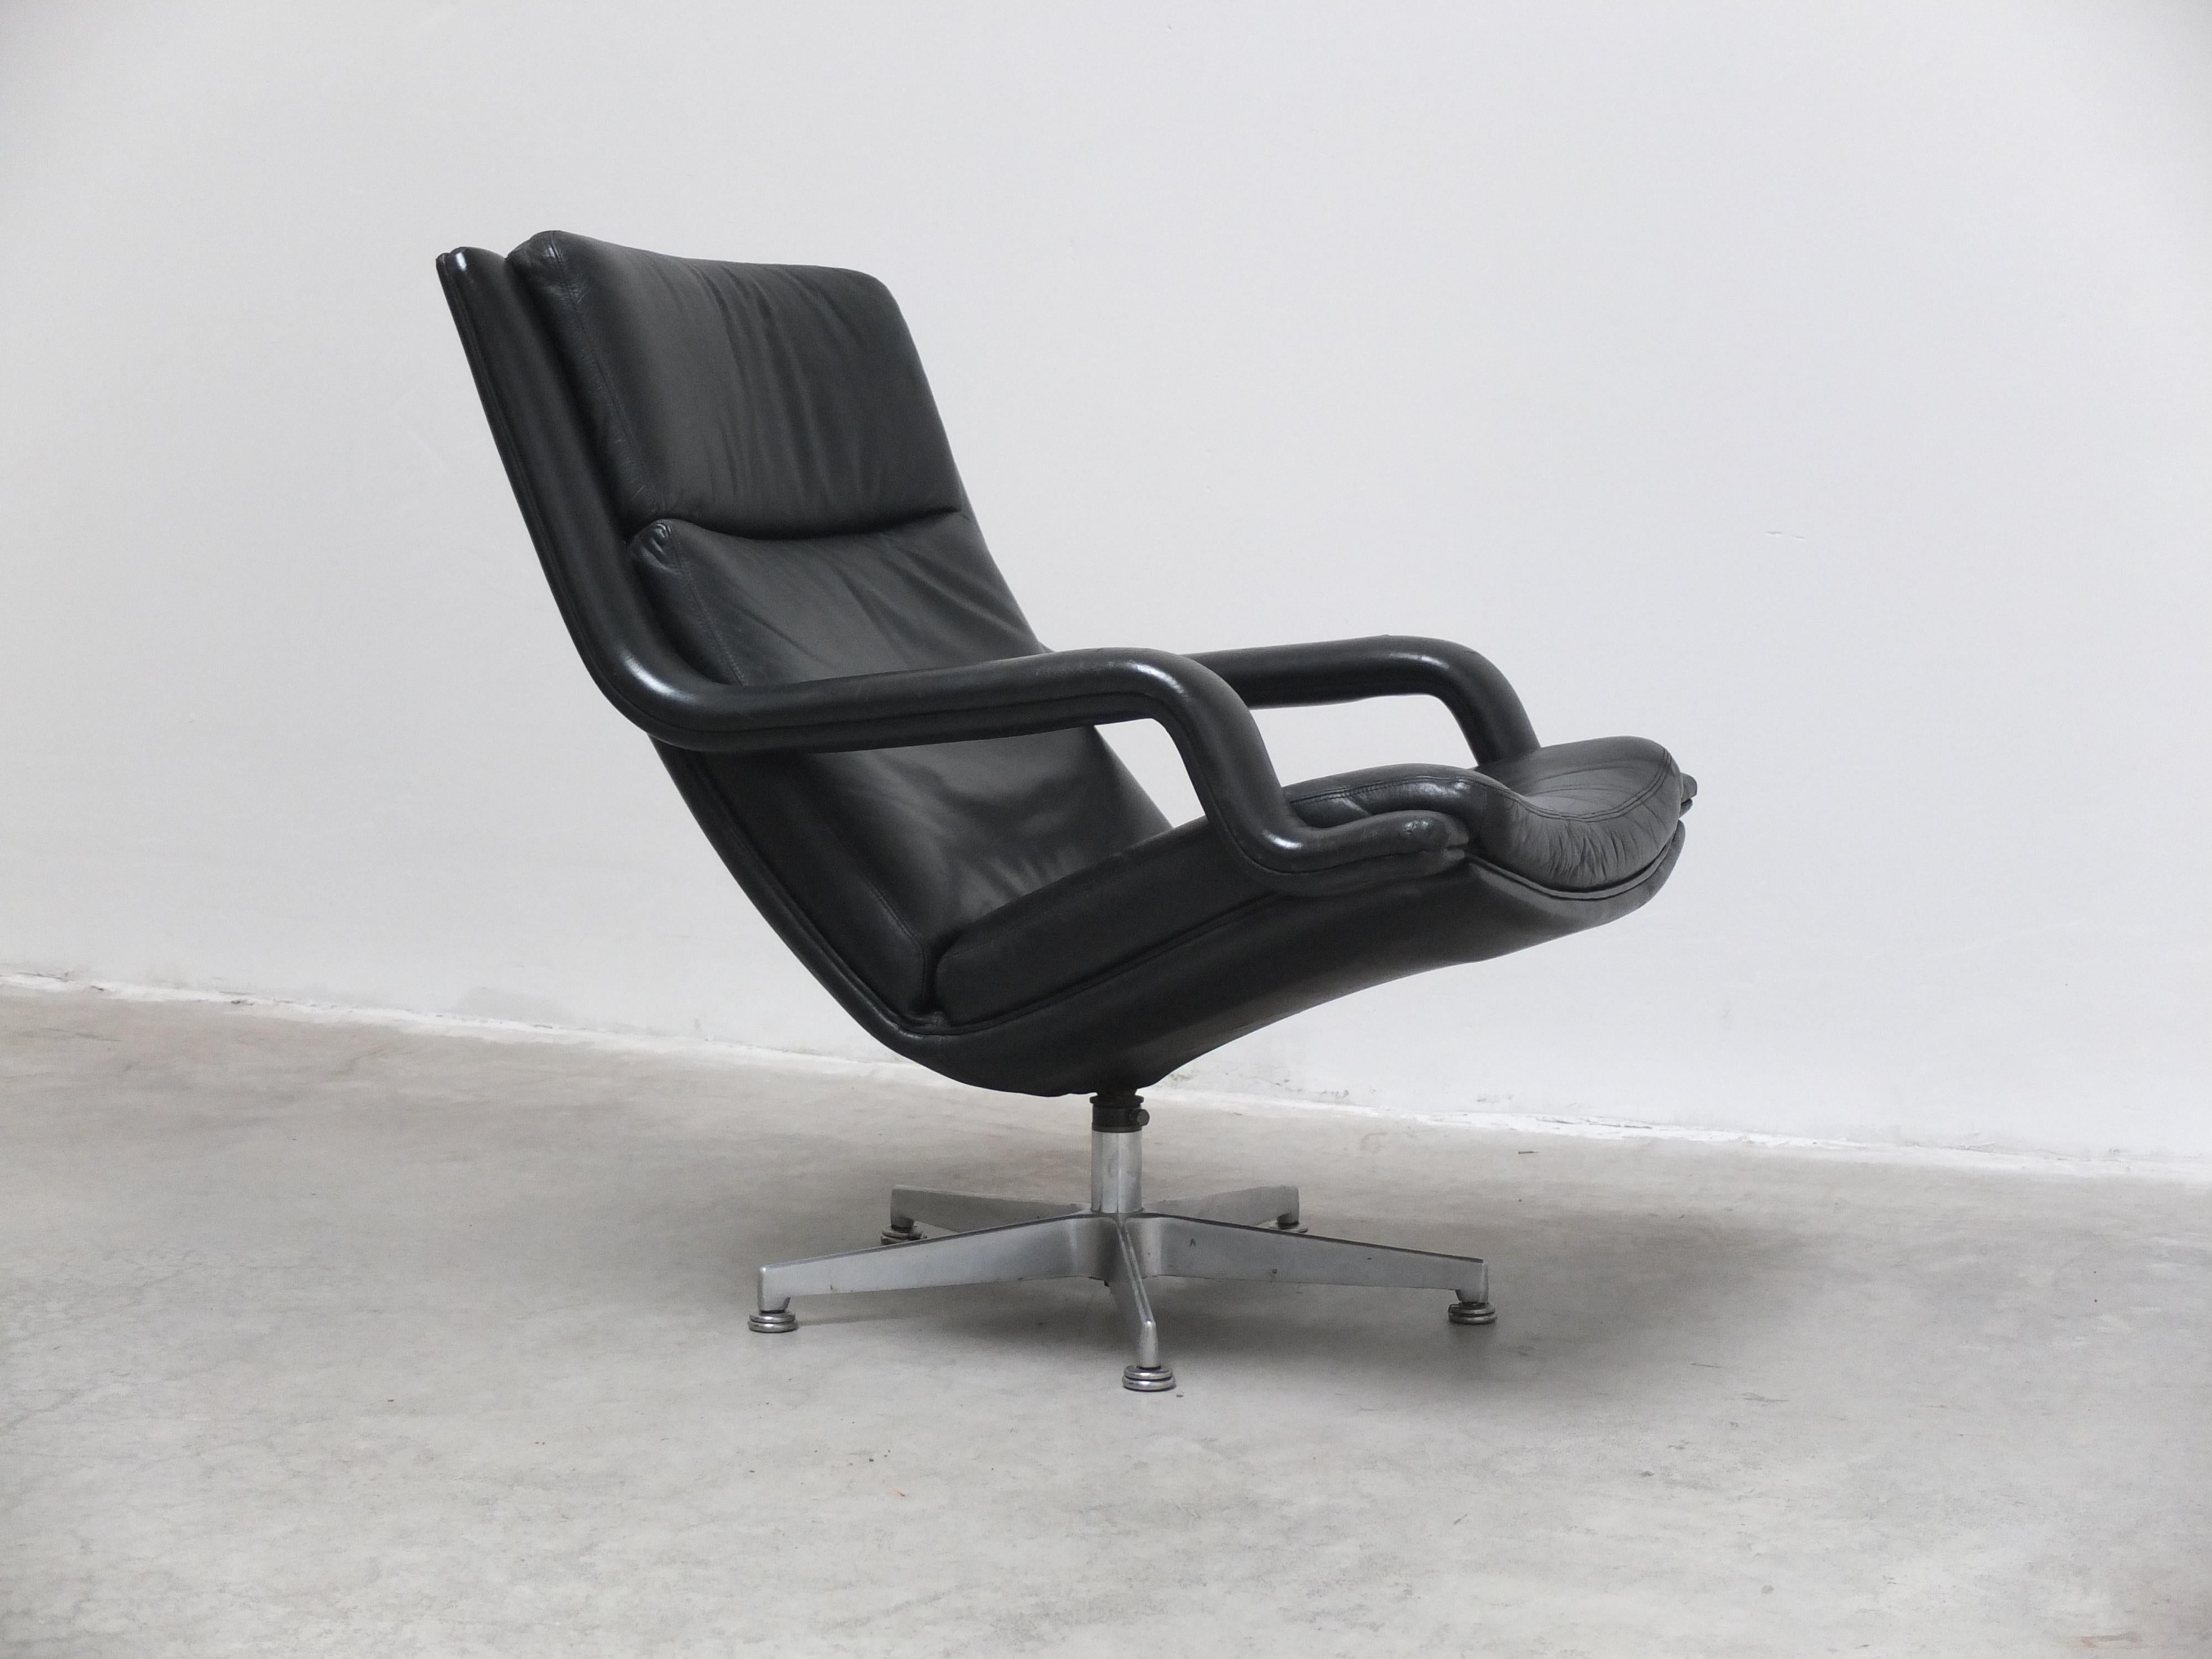 Leather 'F152' Swivel Lounge Chairs by Geoffrey Harcourt for Artifort, 1970s For Sale 3